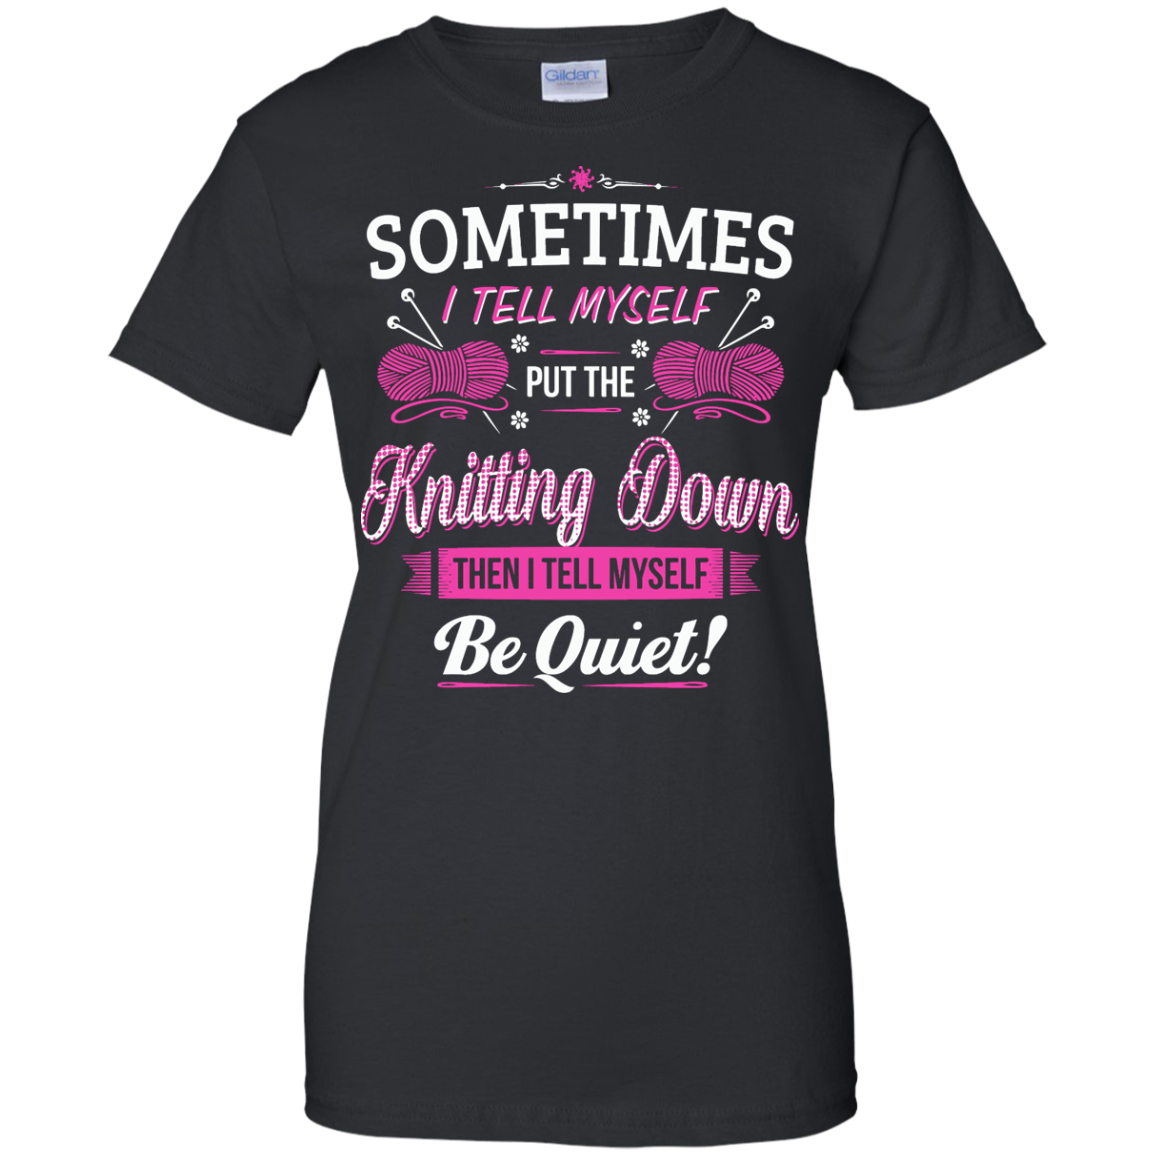 Put the Knitting Down Ladies Custom 100% Cotton T-Shirt - Crafter4Life - 2